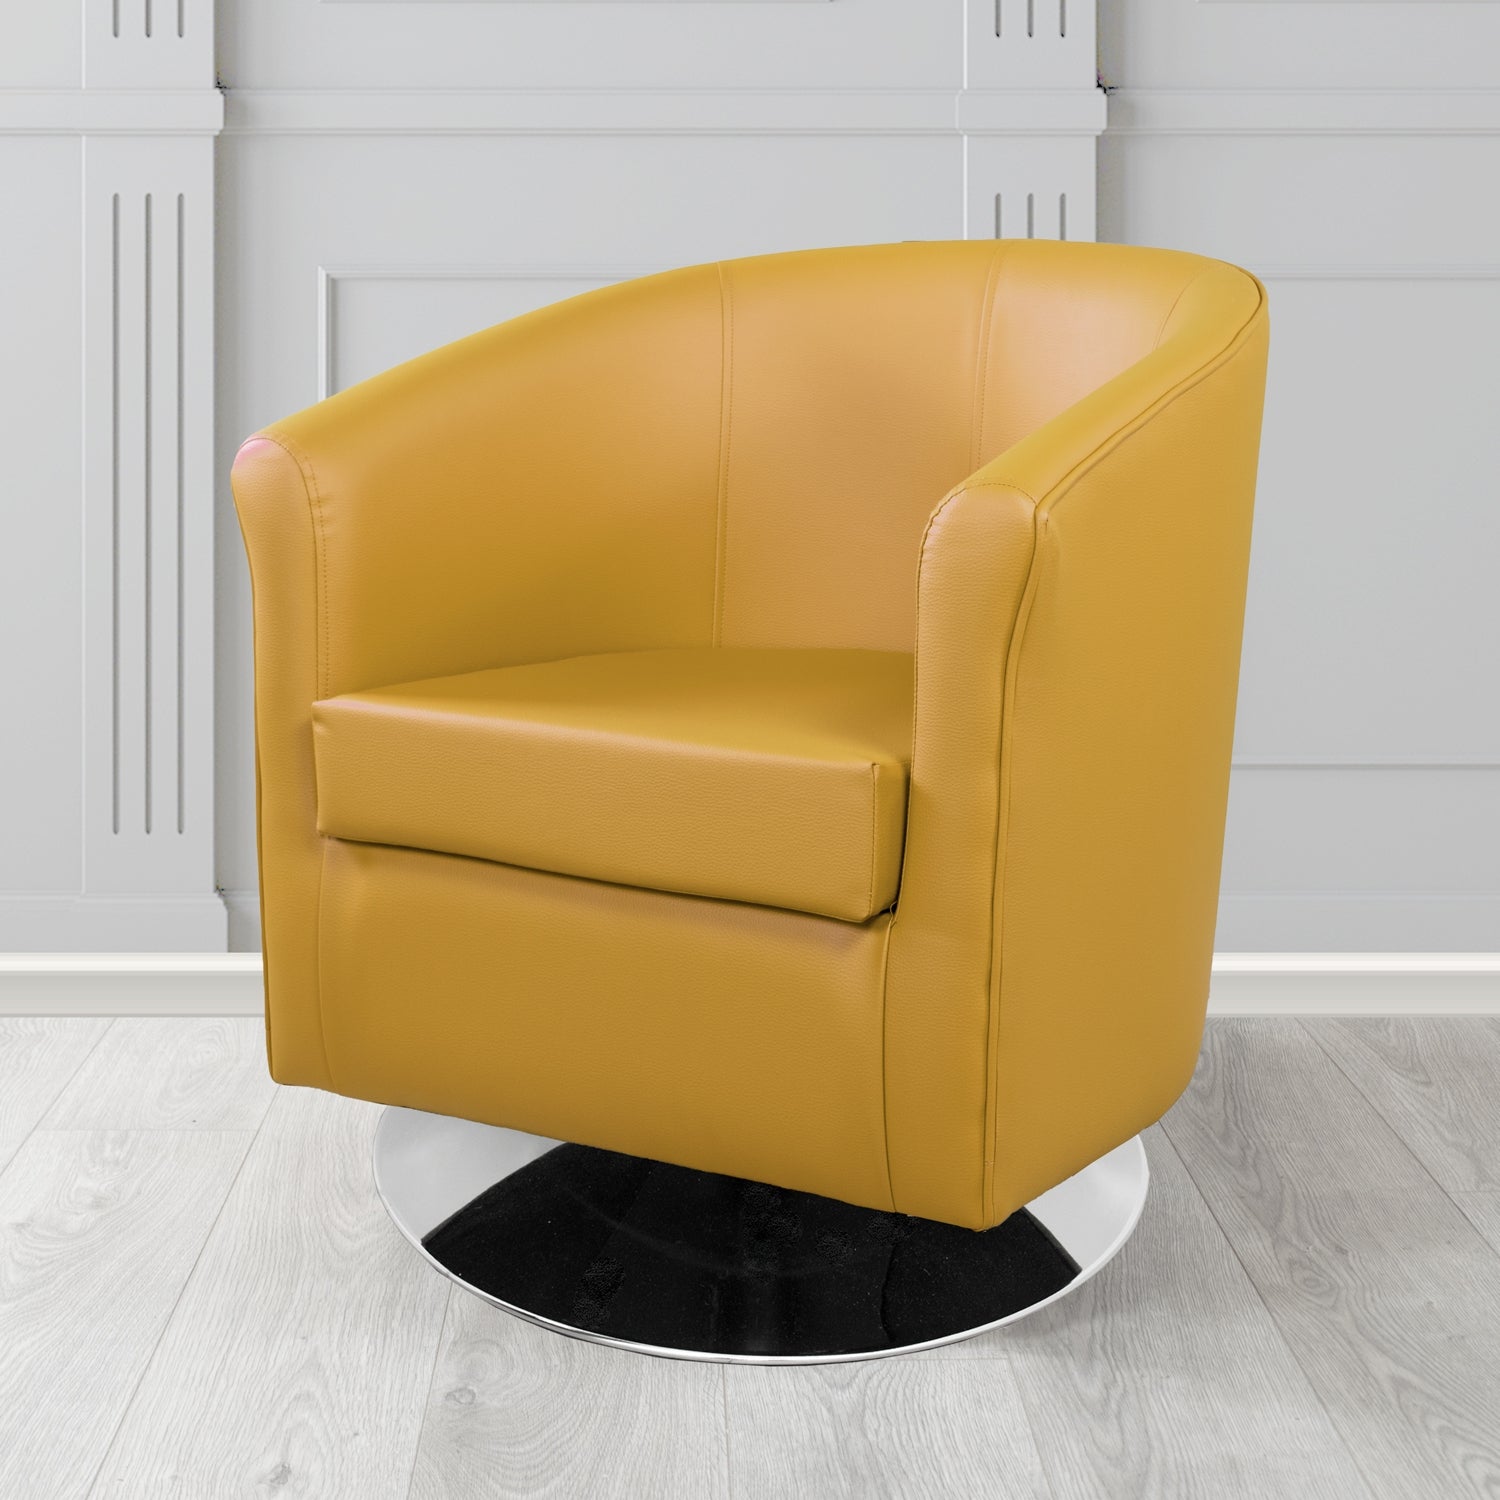 Tuscany Just Colour Golden Honey Crib 5 Faux Leather Swivel Tub Chair - The Tub Chair Shop